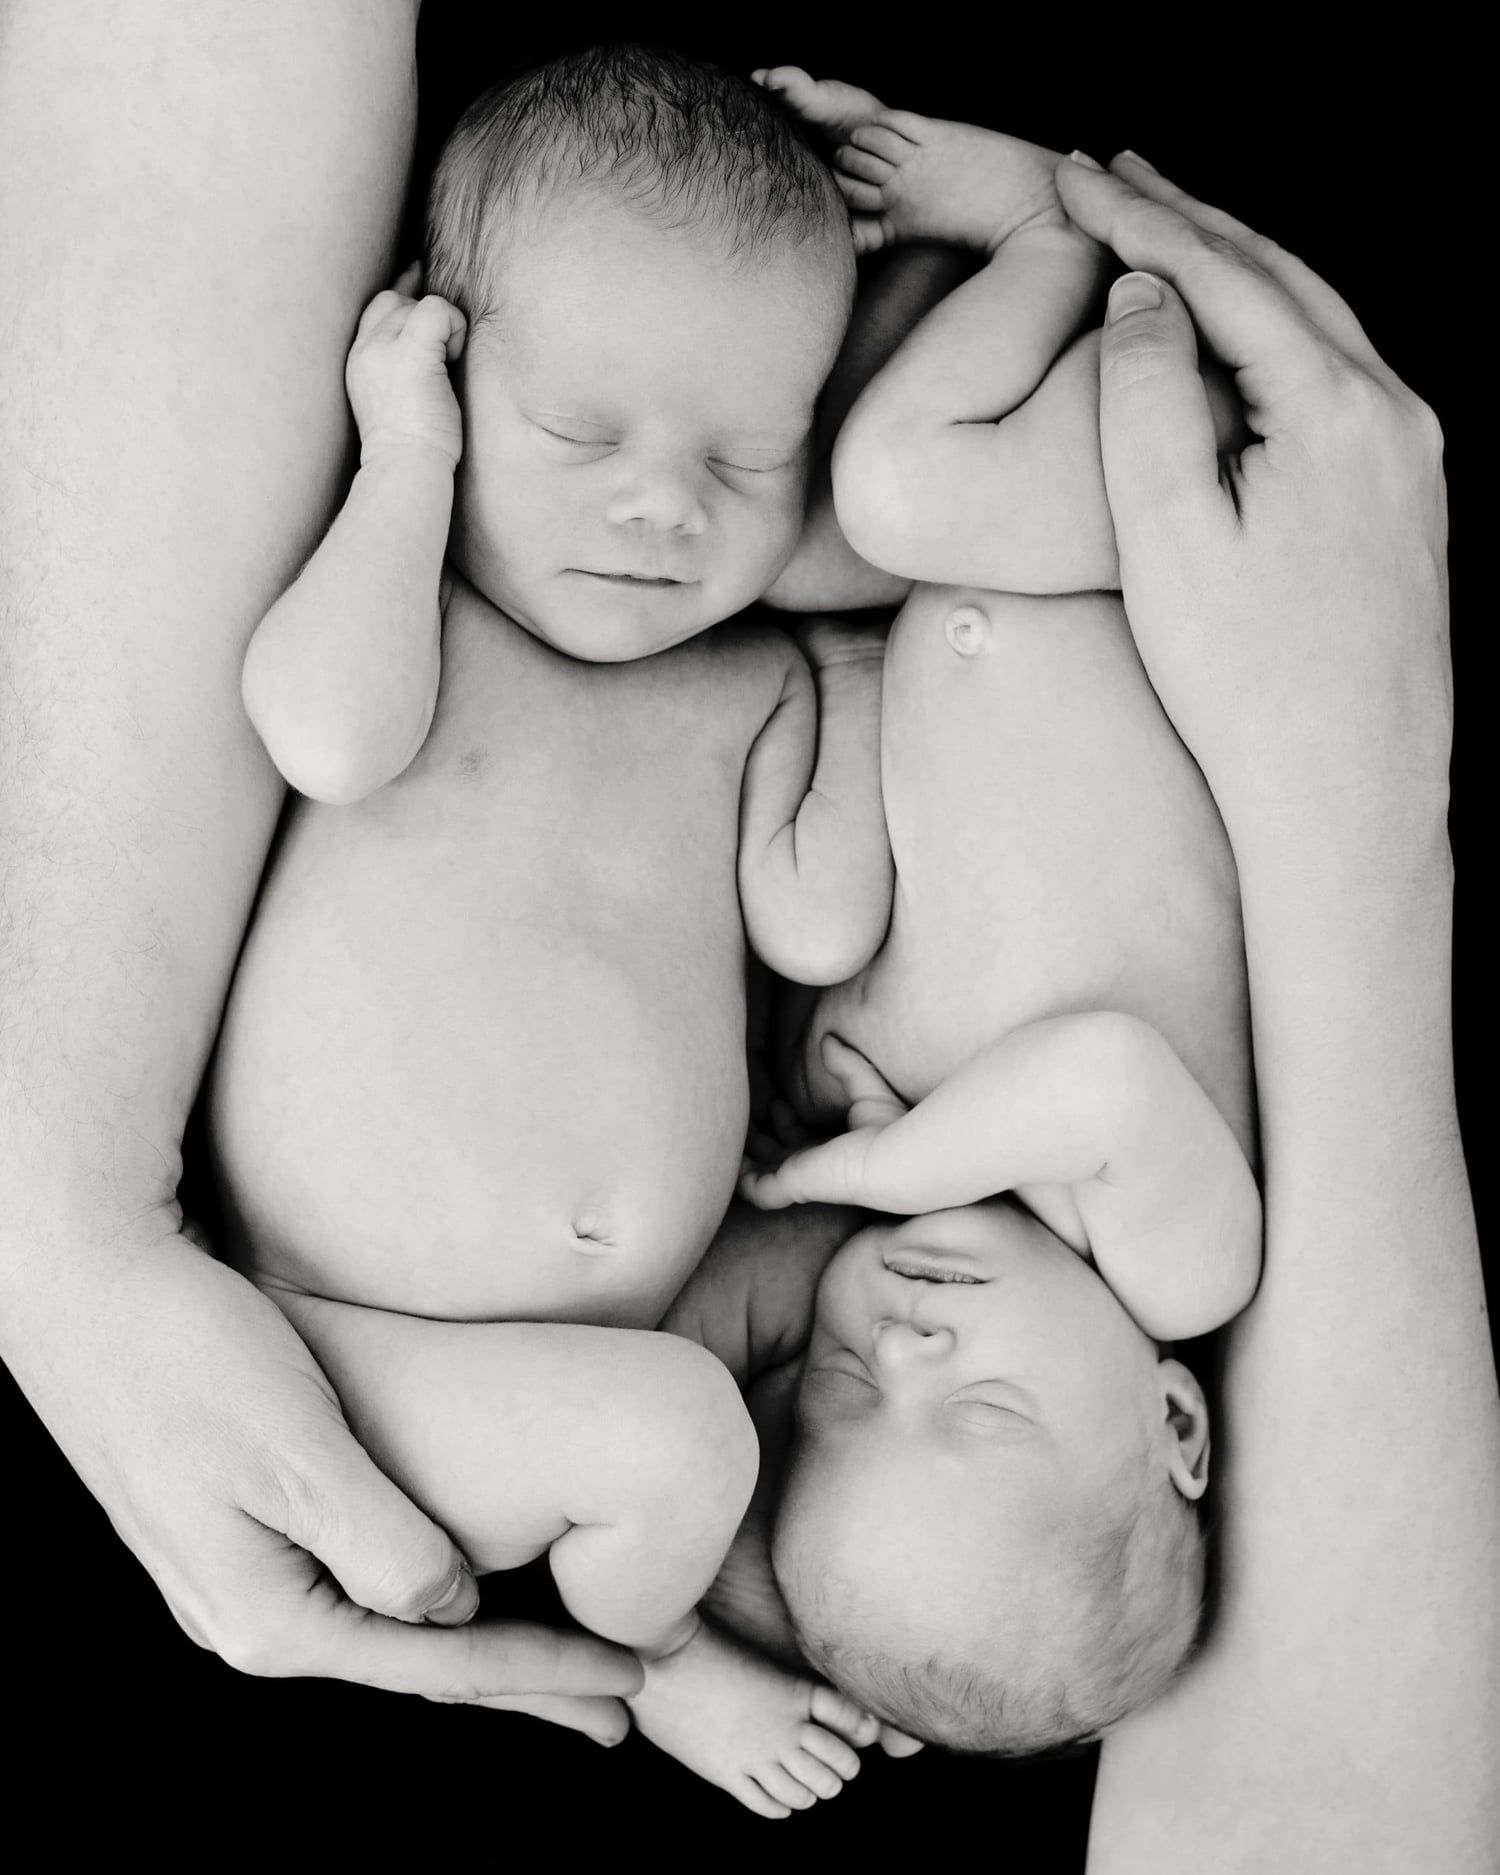 Two newborn babies in a black and white photo.